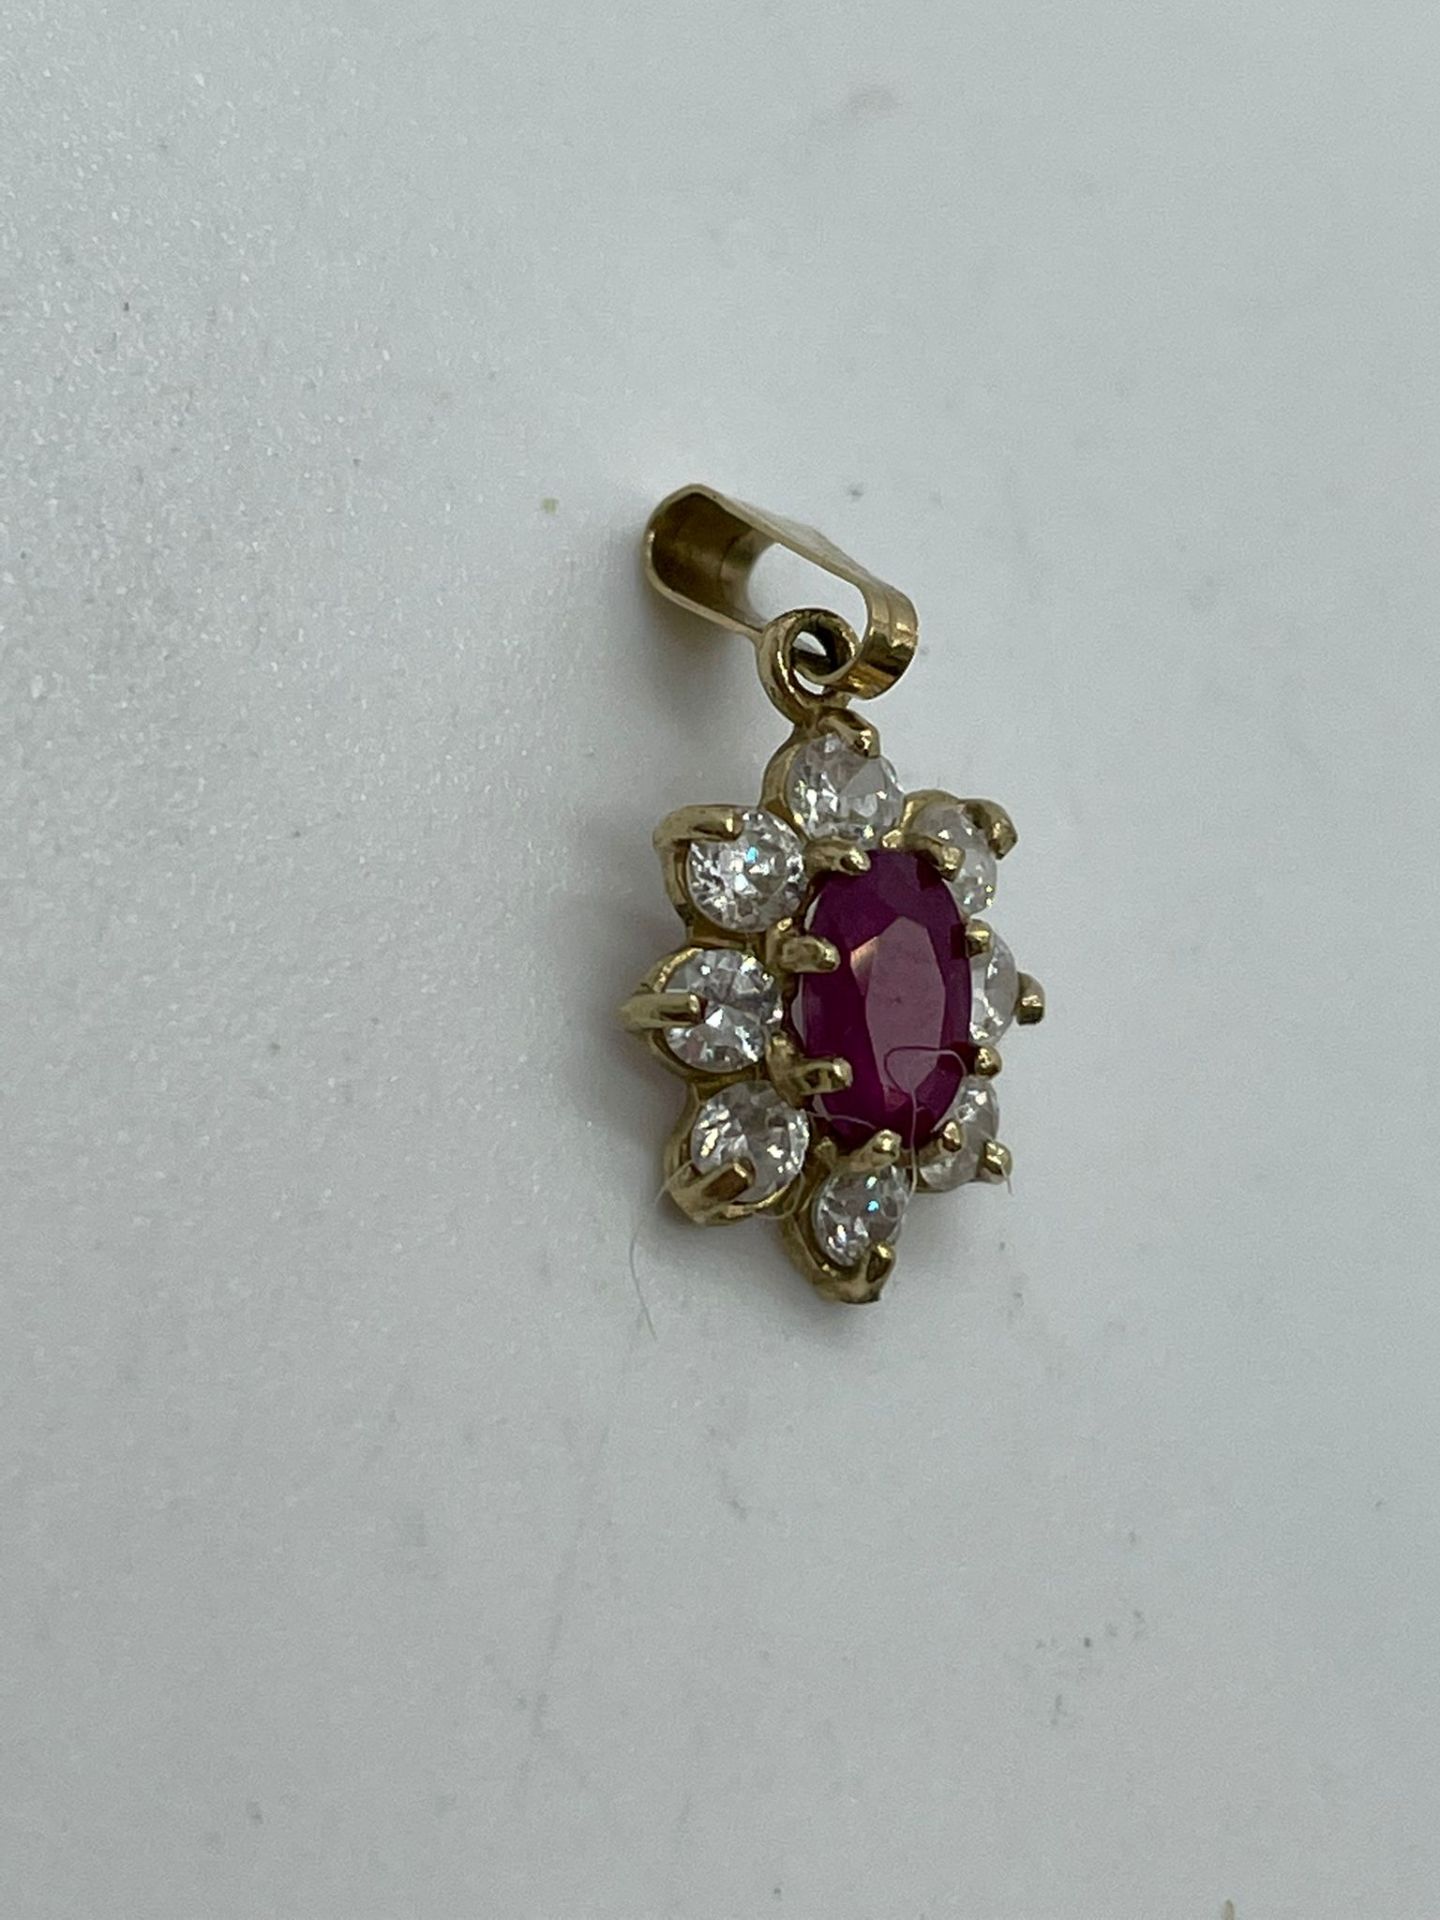 9ct gold ruby and CZ pendant - Image 2 of 2